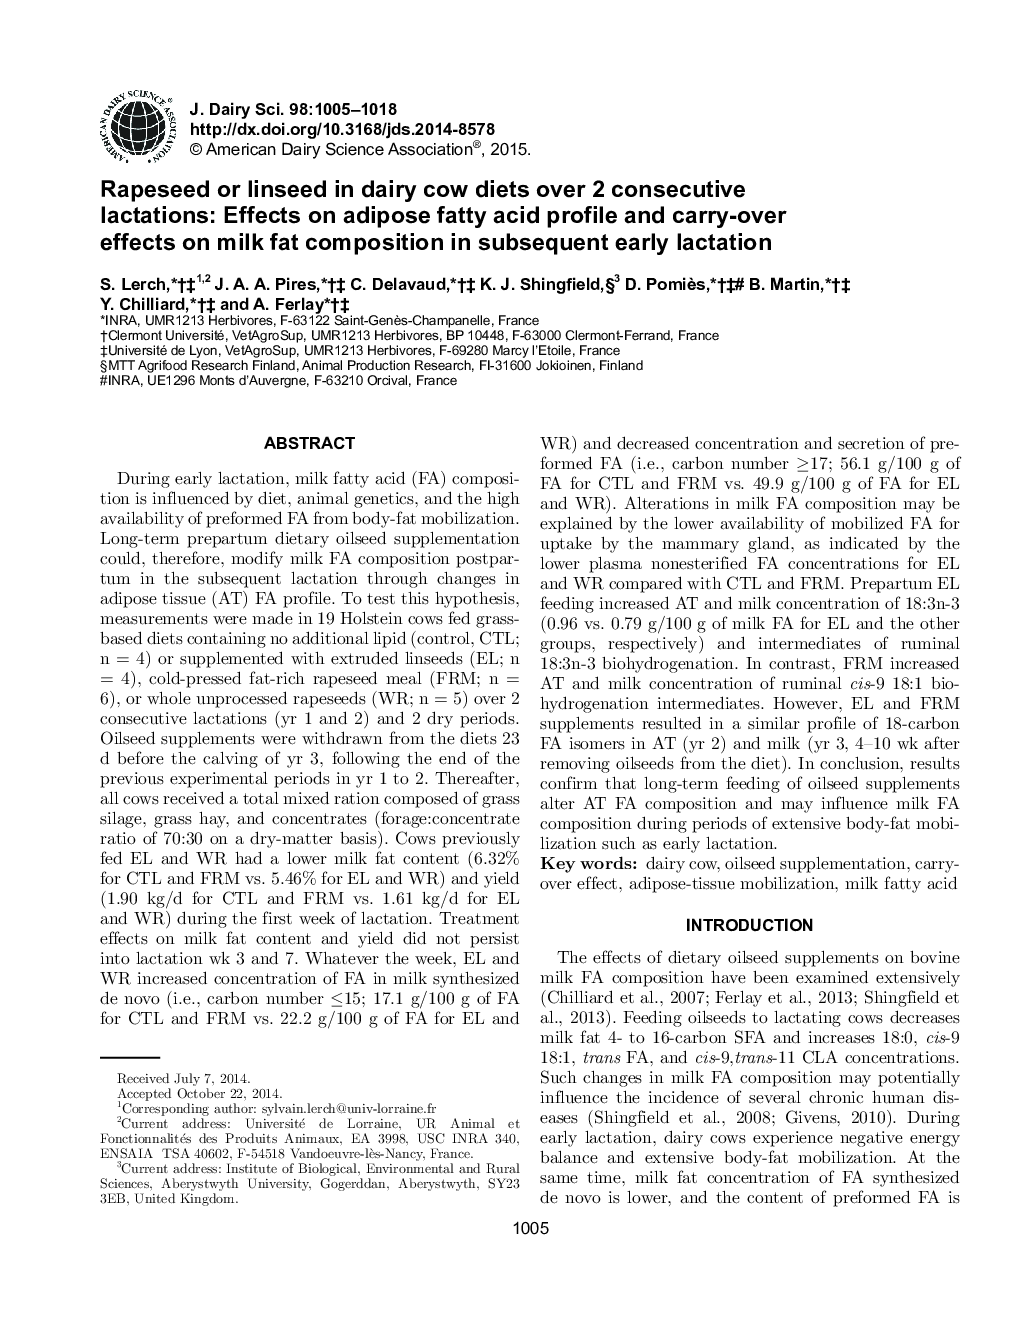 Rapeseed or linseed in dairy cow diets over 2 consecutive lactations: Effects on adipose fatty acid profile and carry-over effects on milk fat composition in subsequent early lactation